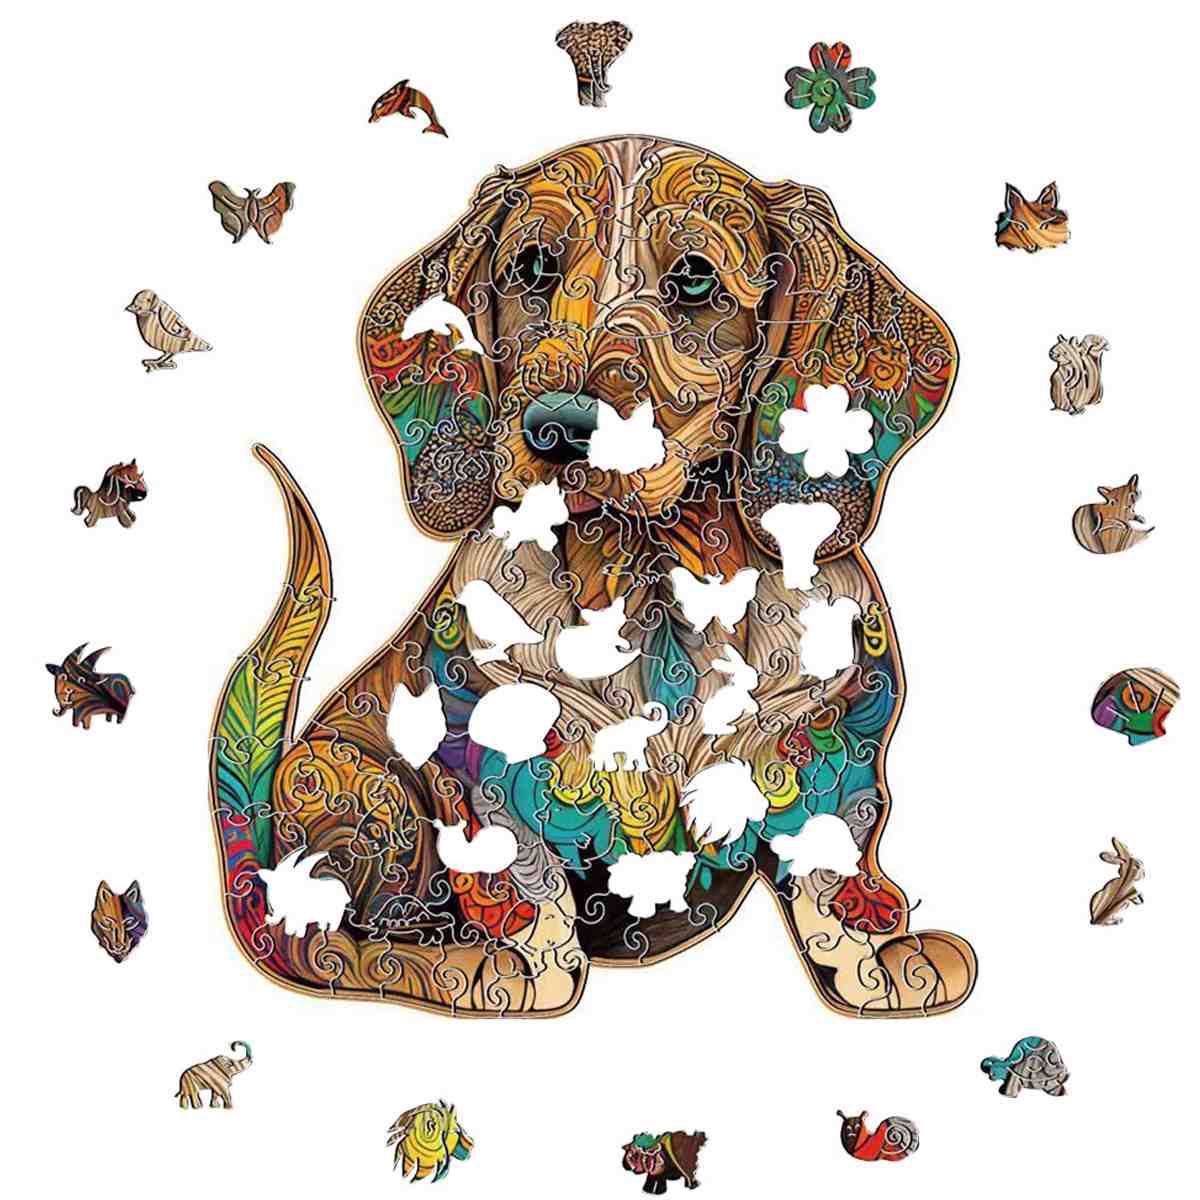 Animal Jigsaw Puzzle > Wooden Jigsaw Puzzle > Jigsaw Puzzle Dachshund - Jigsaw Puzzle